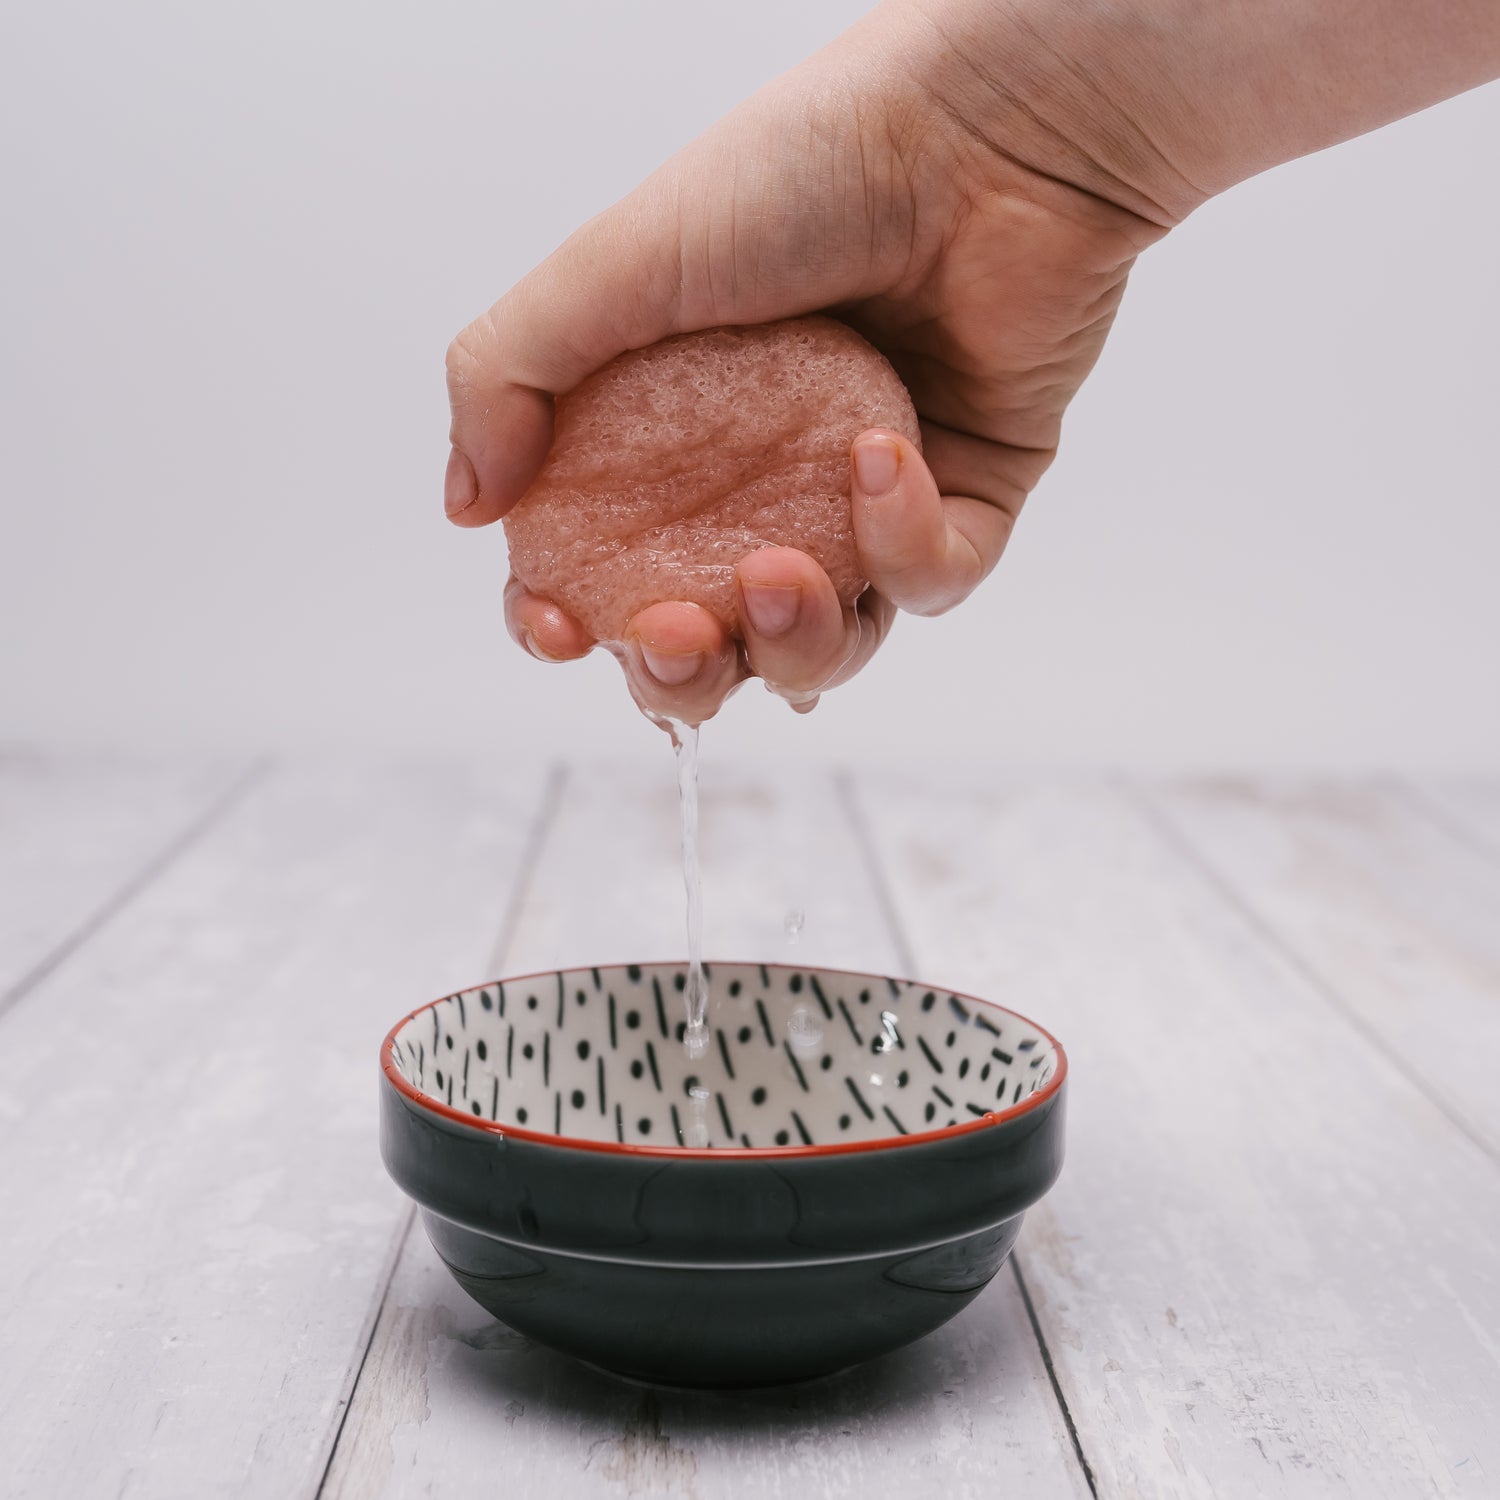 pale pink konjac sponge being wrung over a bowl